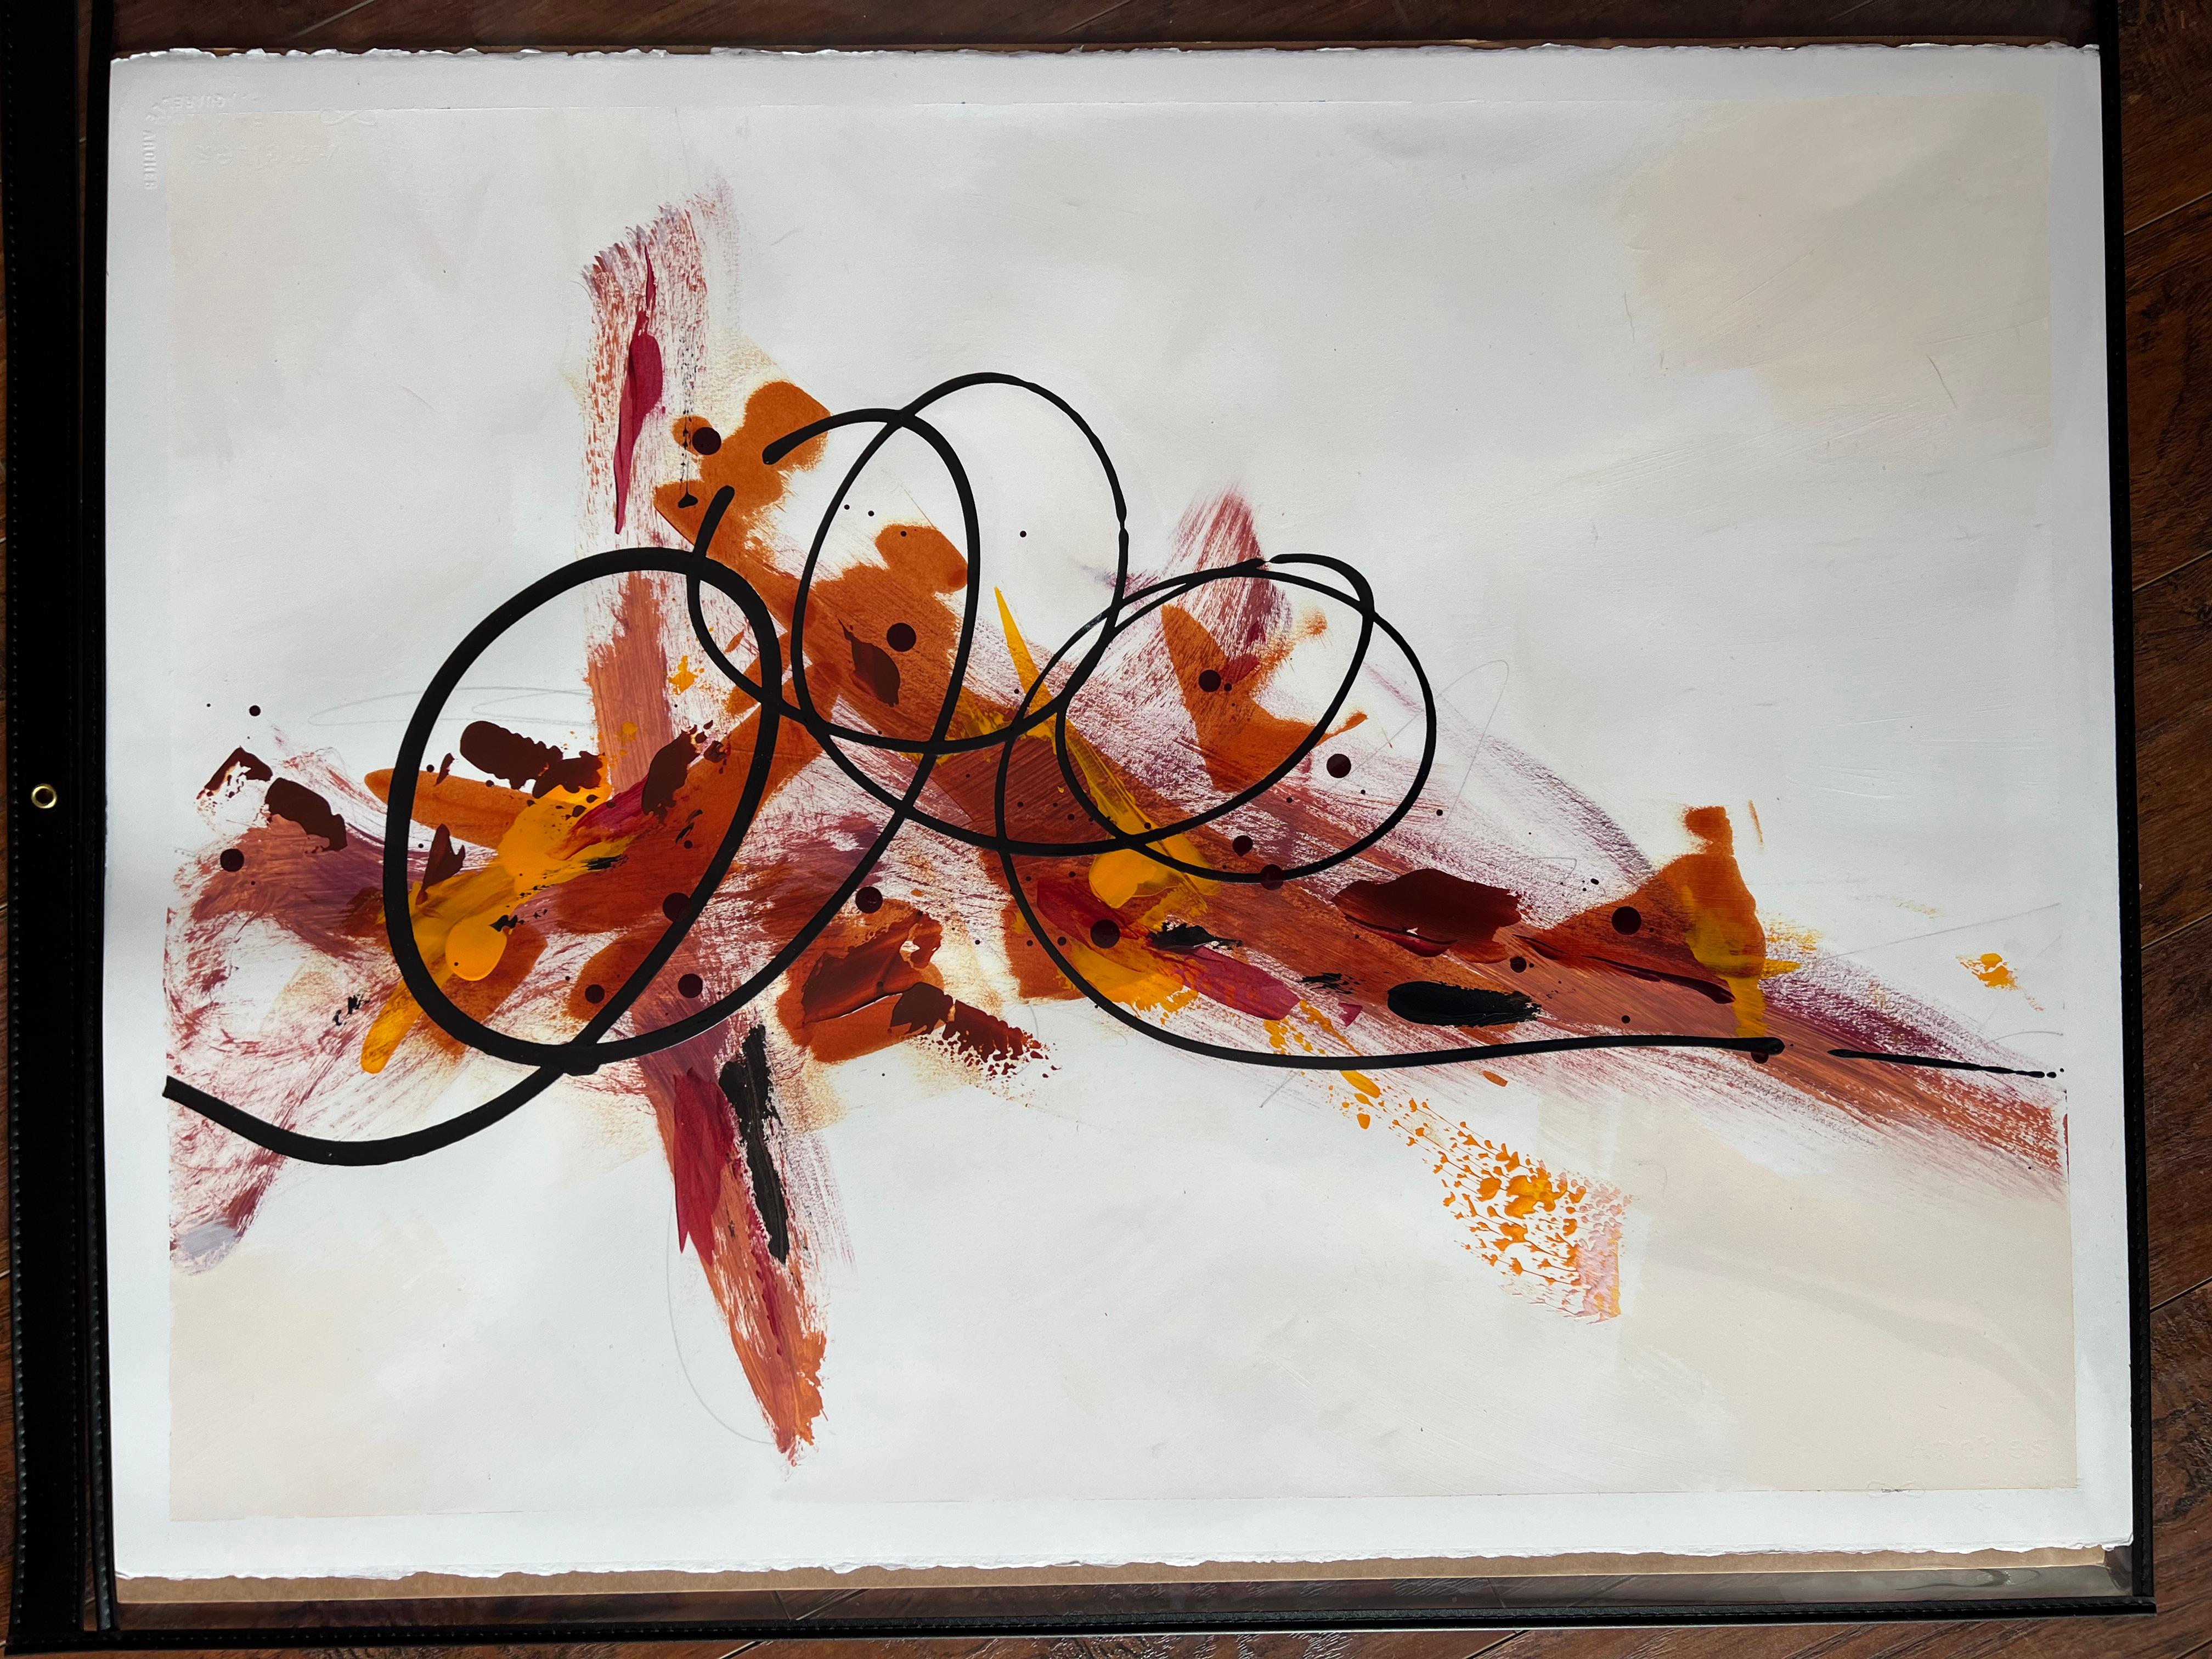 Jump For Joy, Original Contemporary Minimal Orange Energetic Abstract Painting
30x23 (HxW), Acrylic Paint

There is something faintly figurative about this abstract gestural work by artist Jen Sterling. A warm color palette of orange and red breathe